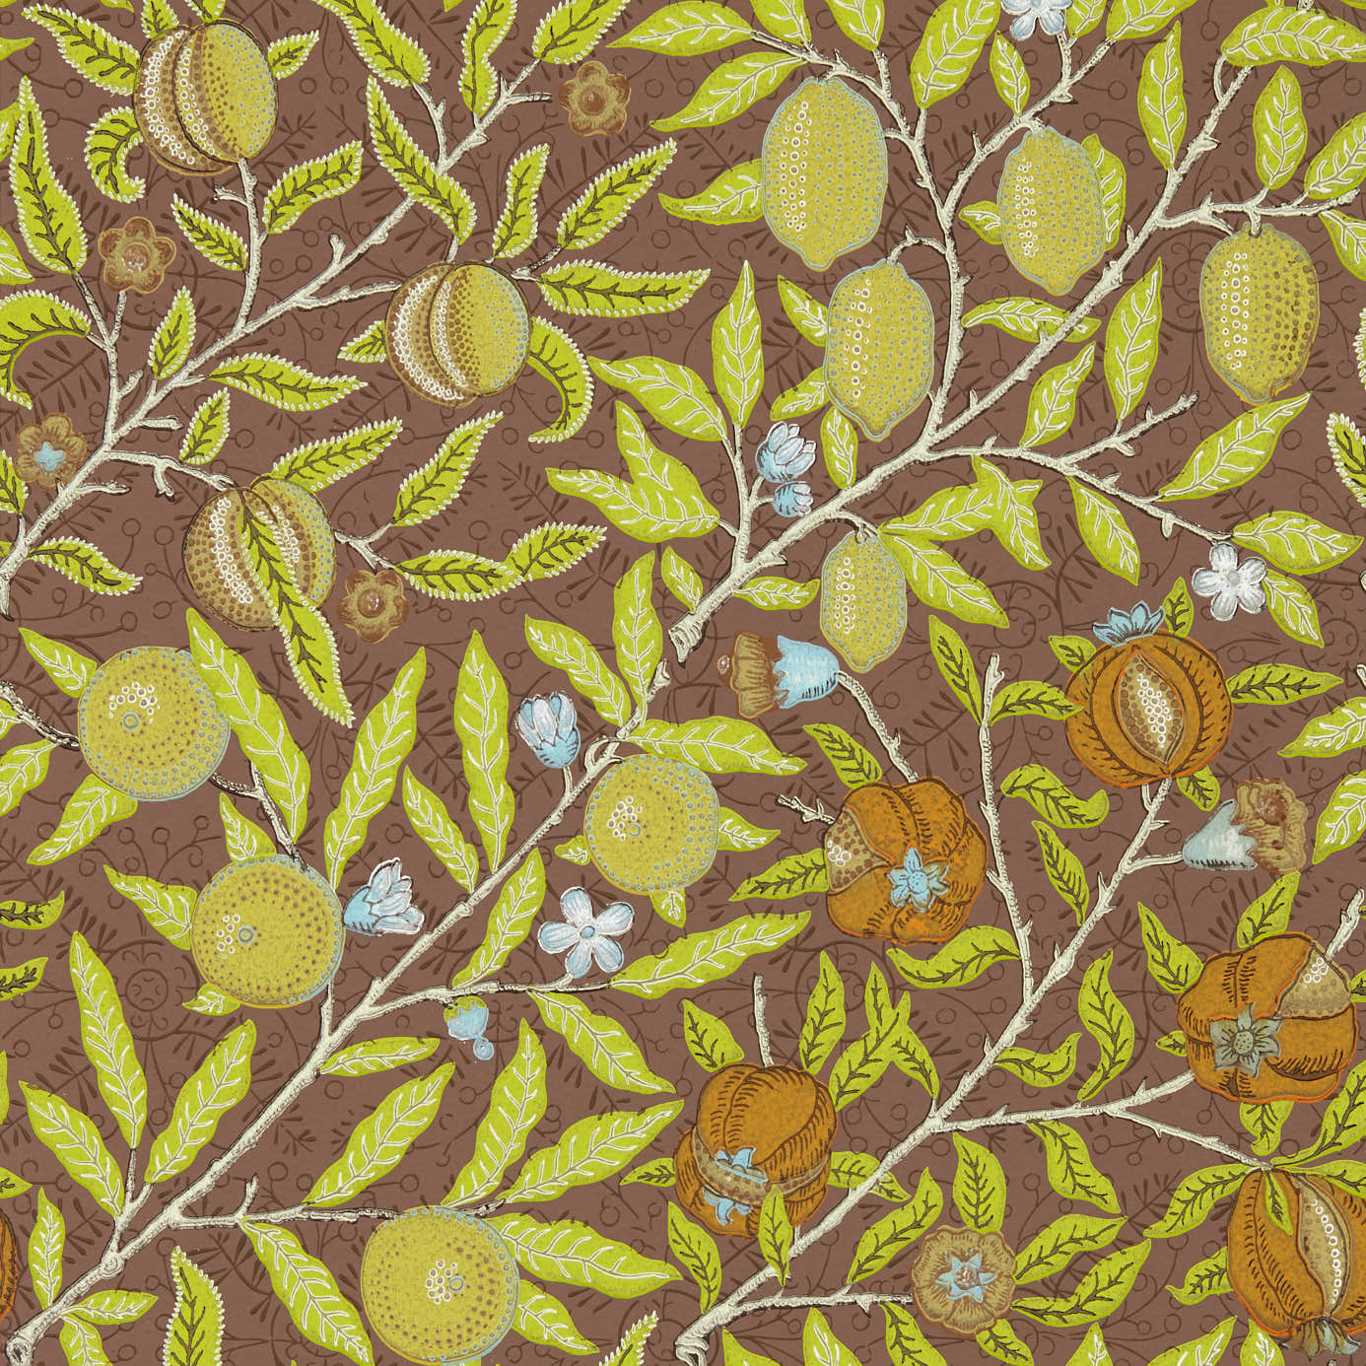 Fruit Chocolate Wallpaper MCOW217103 by Morris & Co